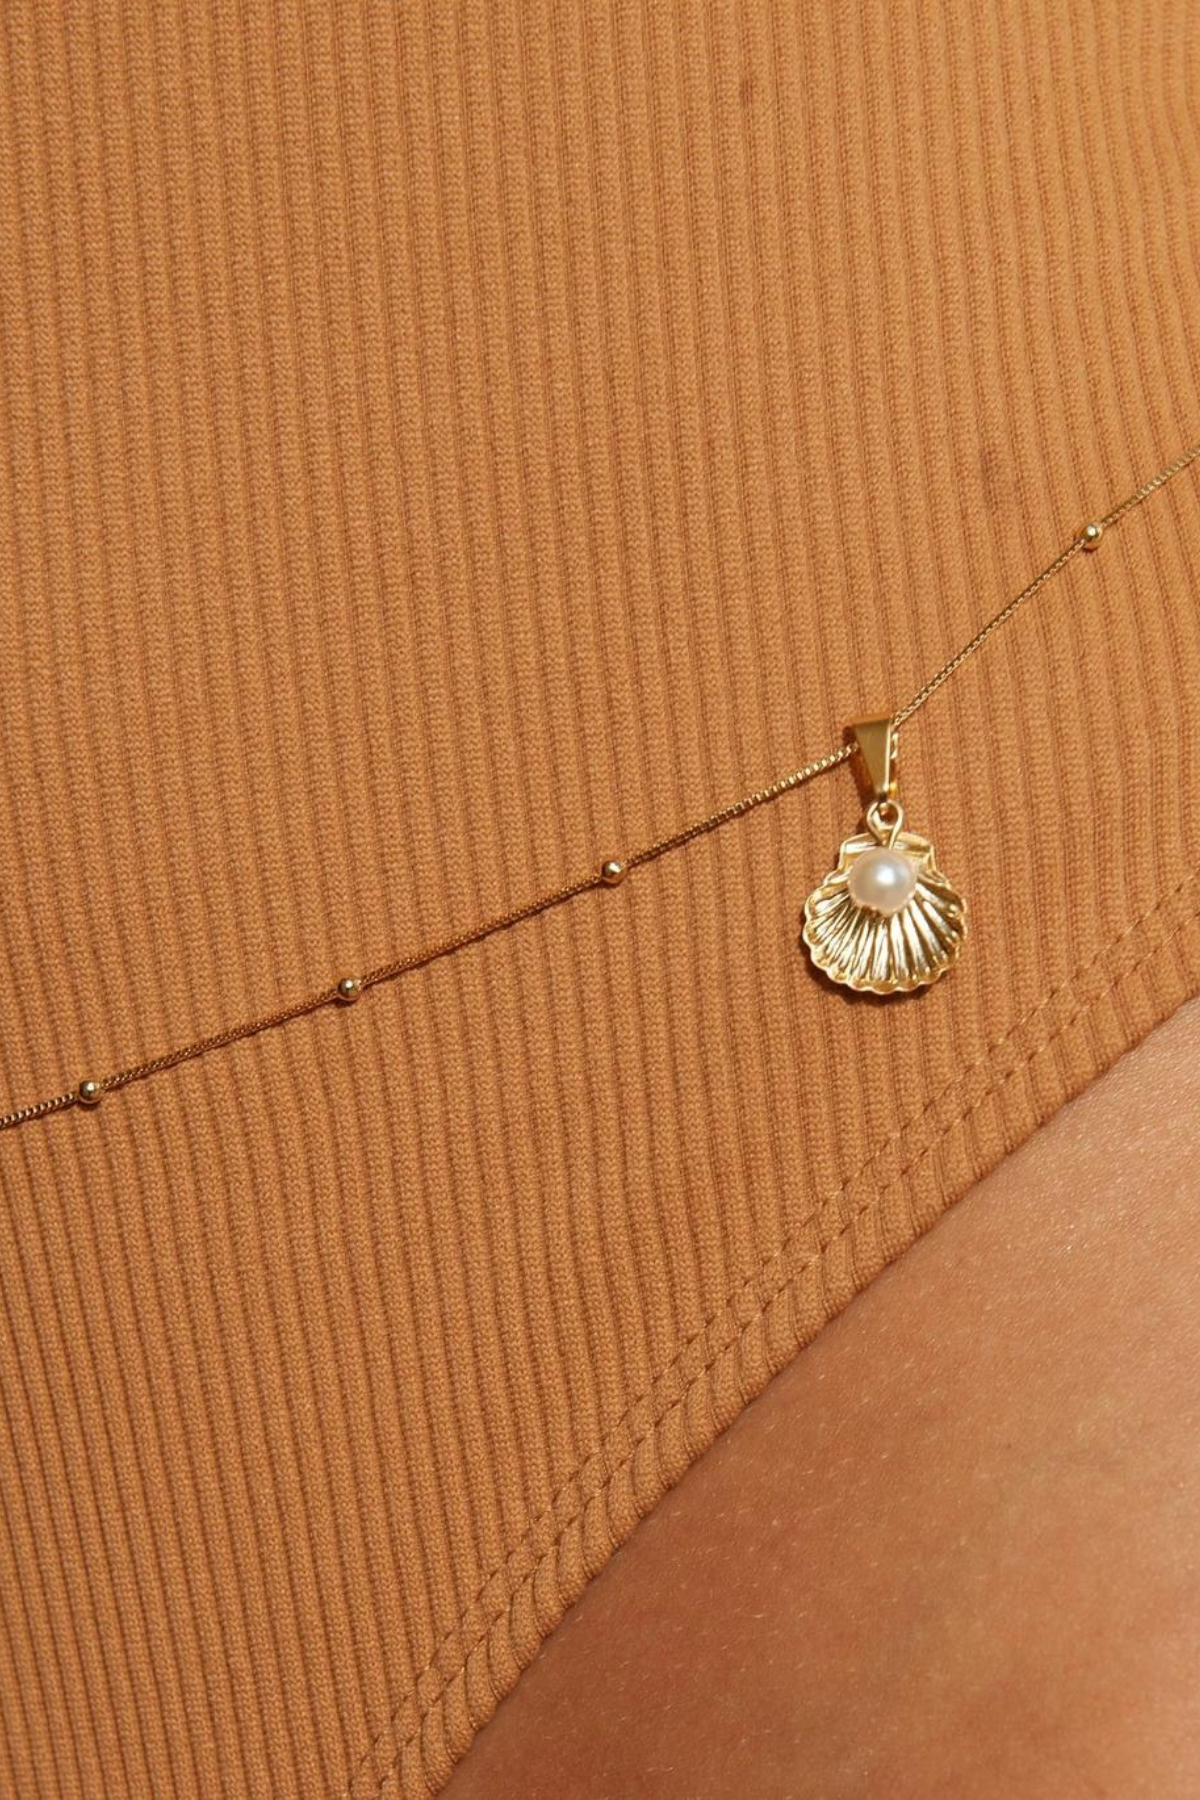 18k gold filled seashell & pearl belly chain